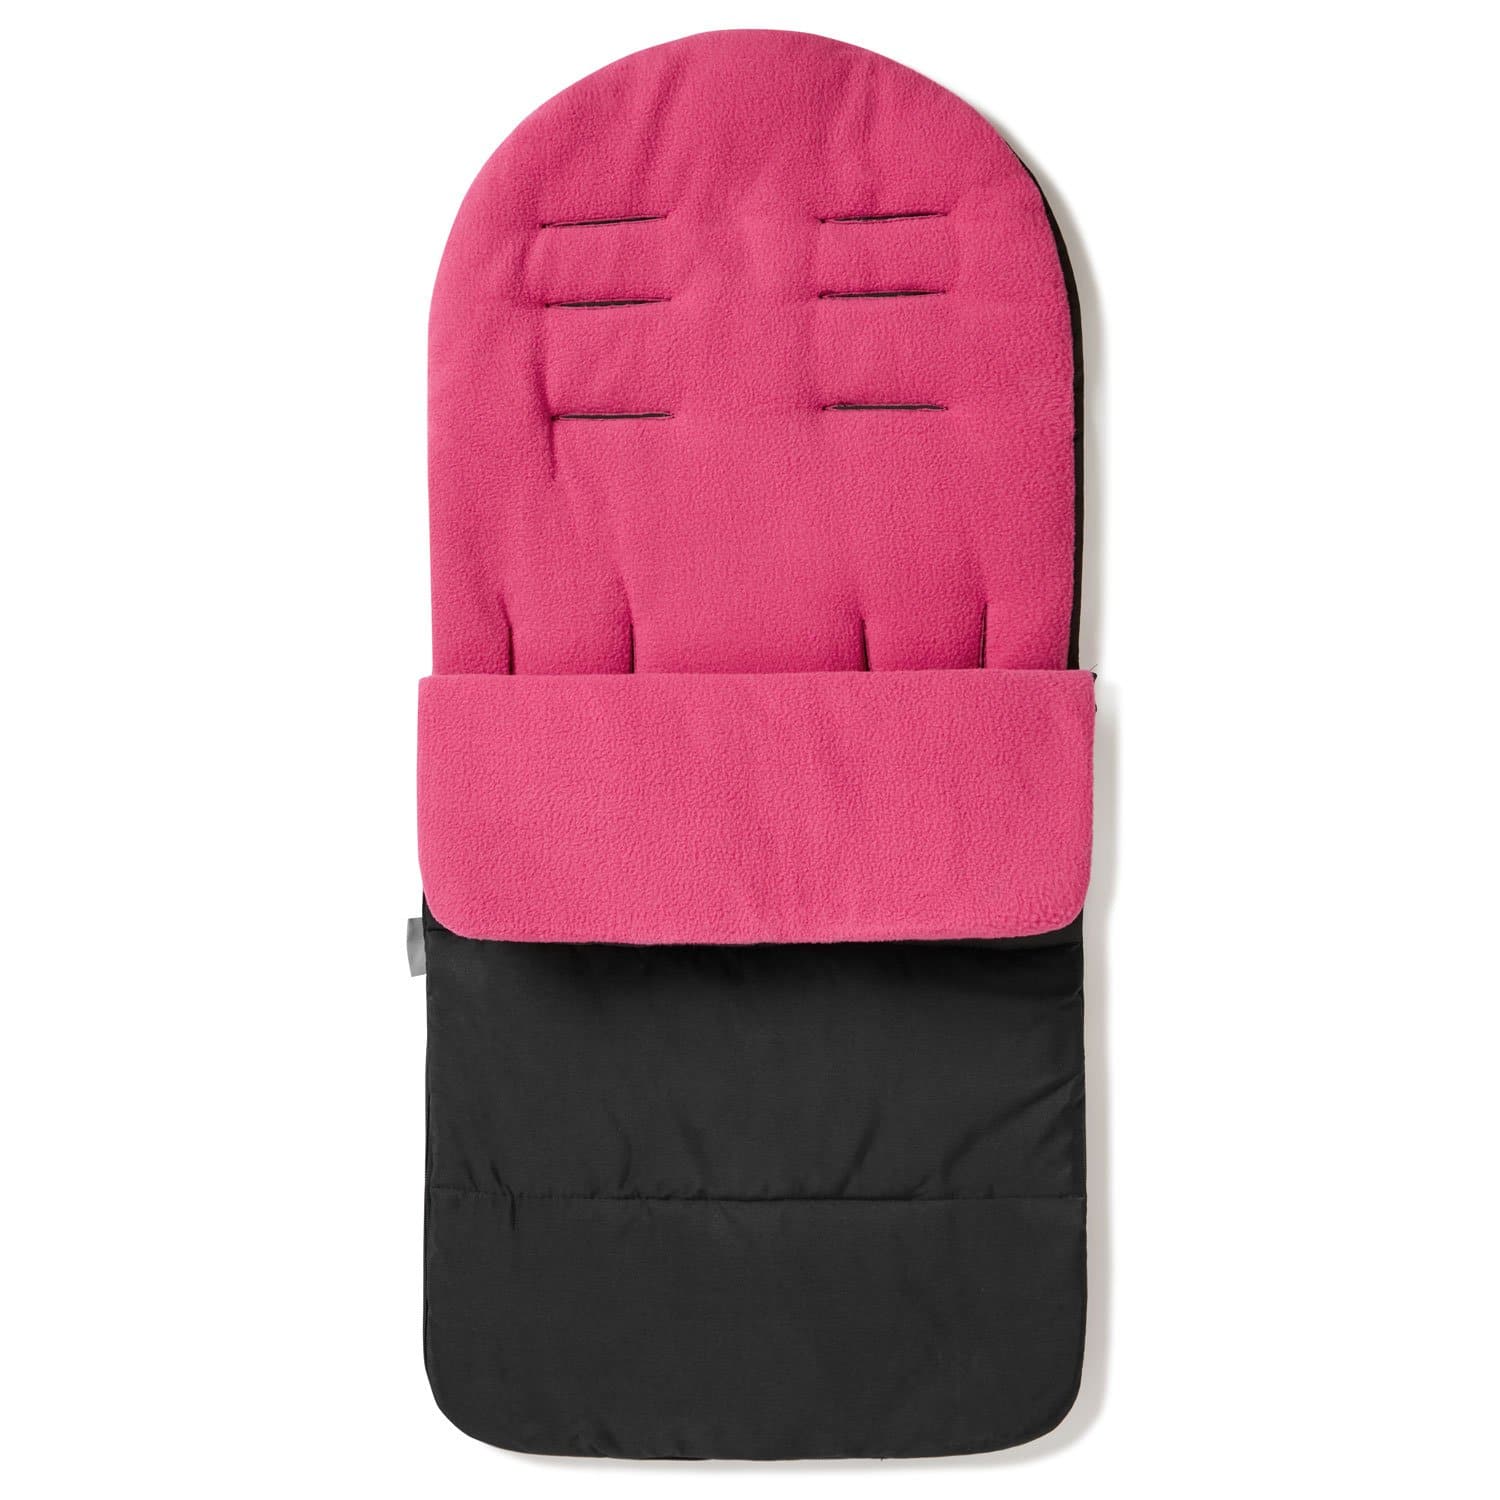 Premium Footmuff / Cosy Toes Compatible with Zeta - Pink Rose / Fits All Models | For Your Little One